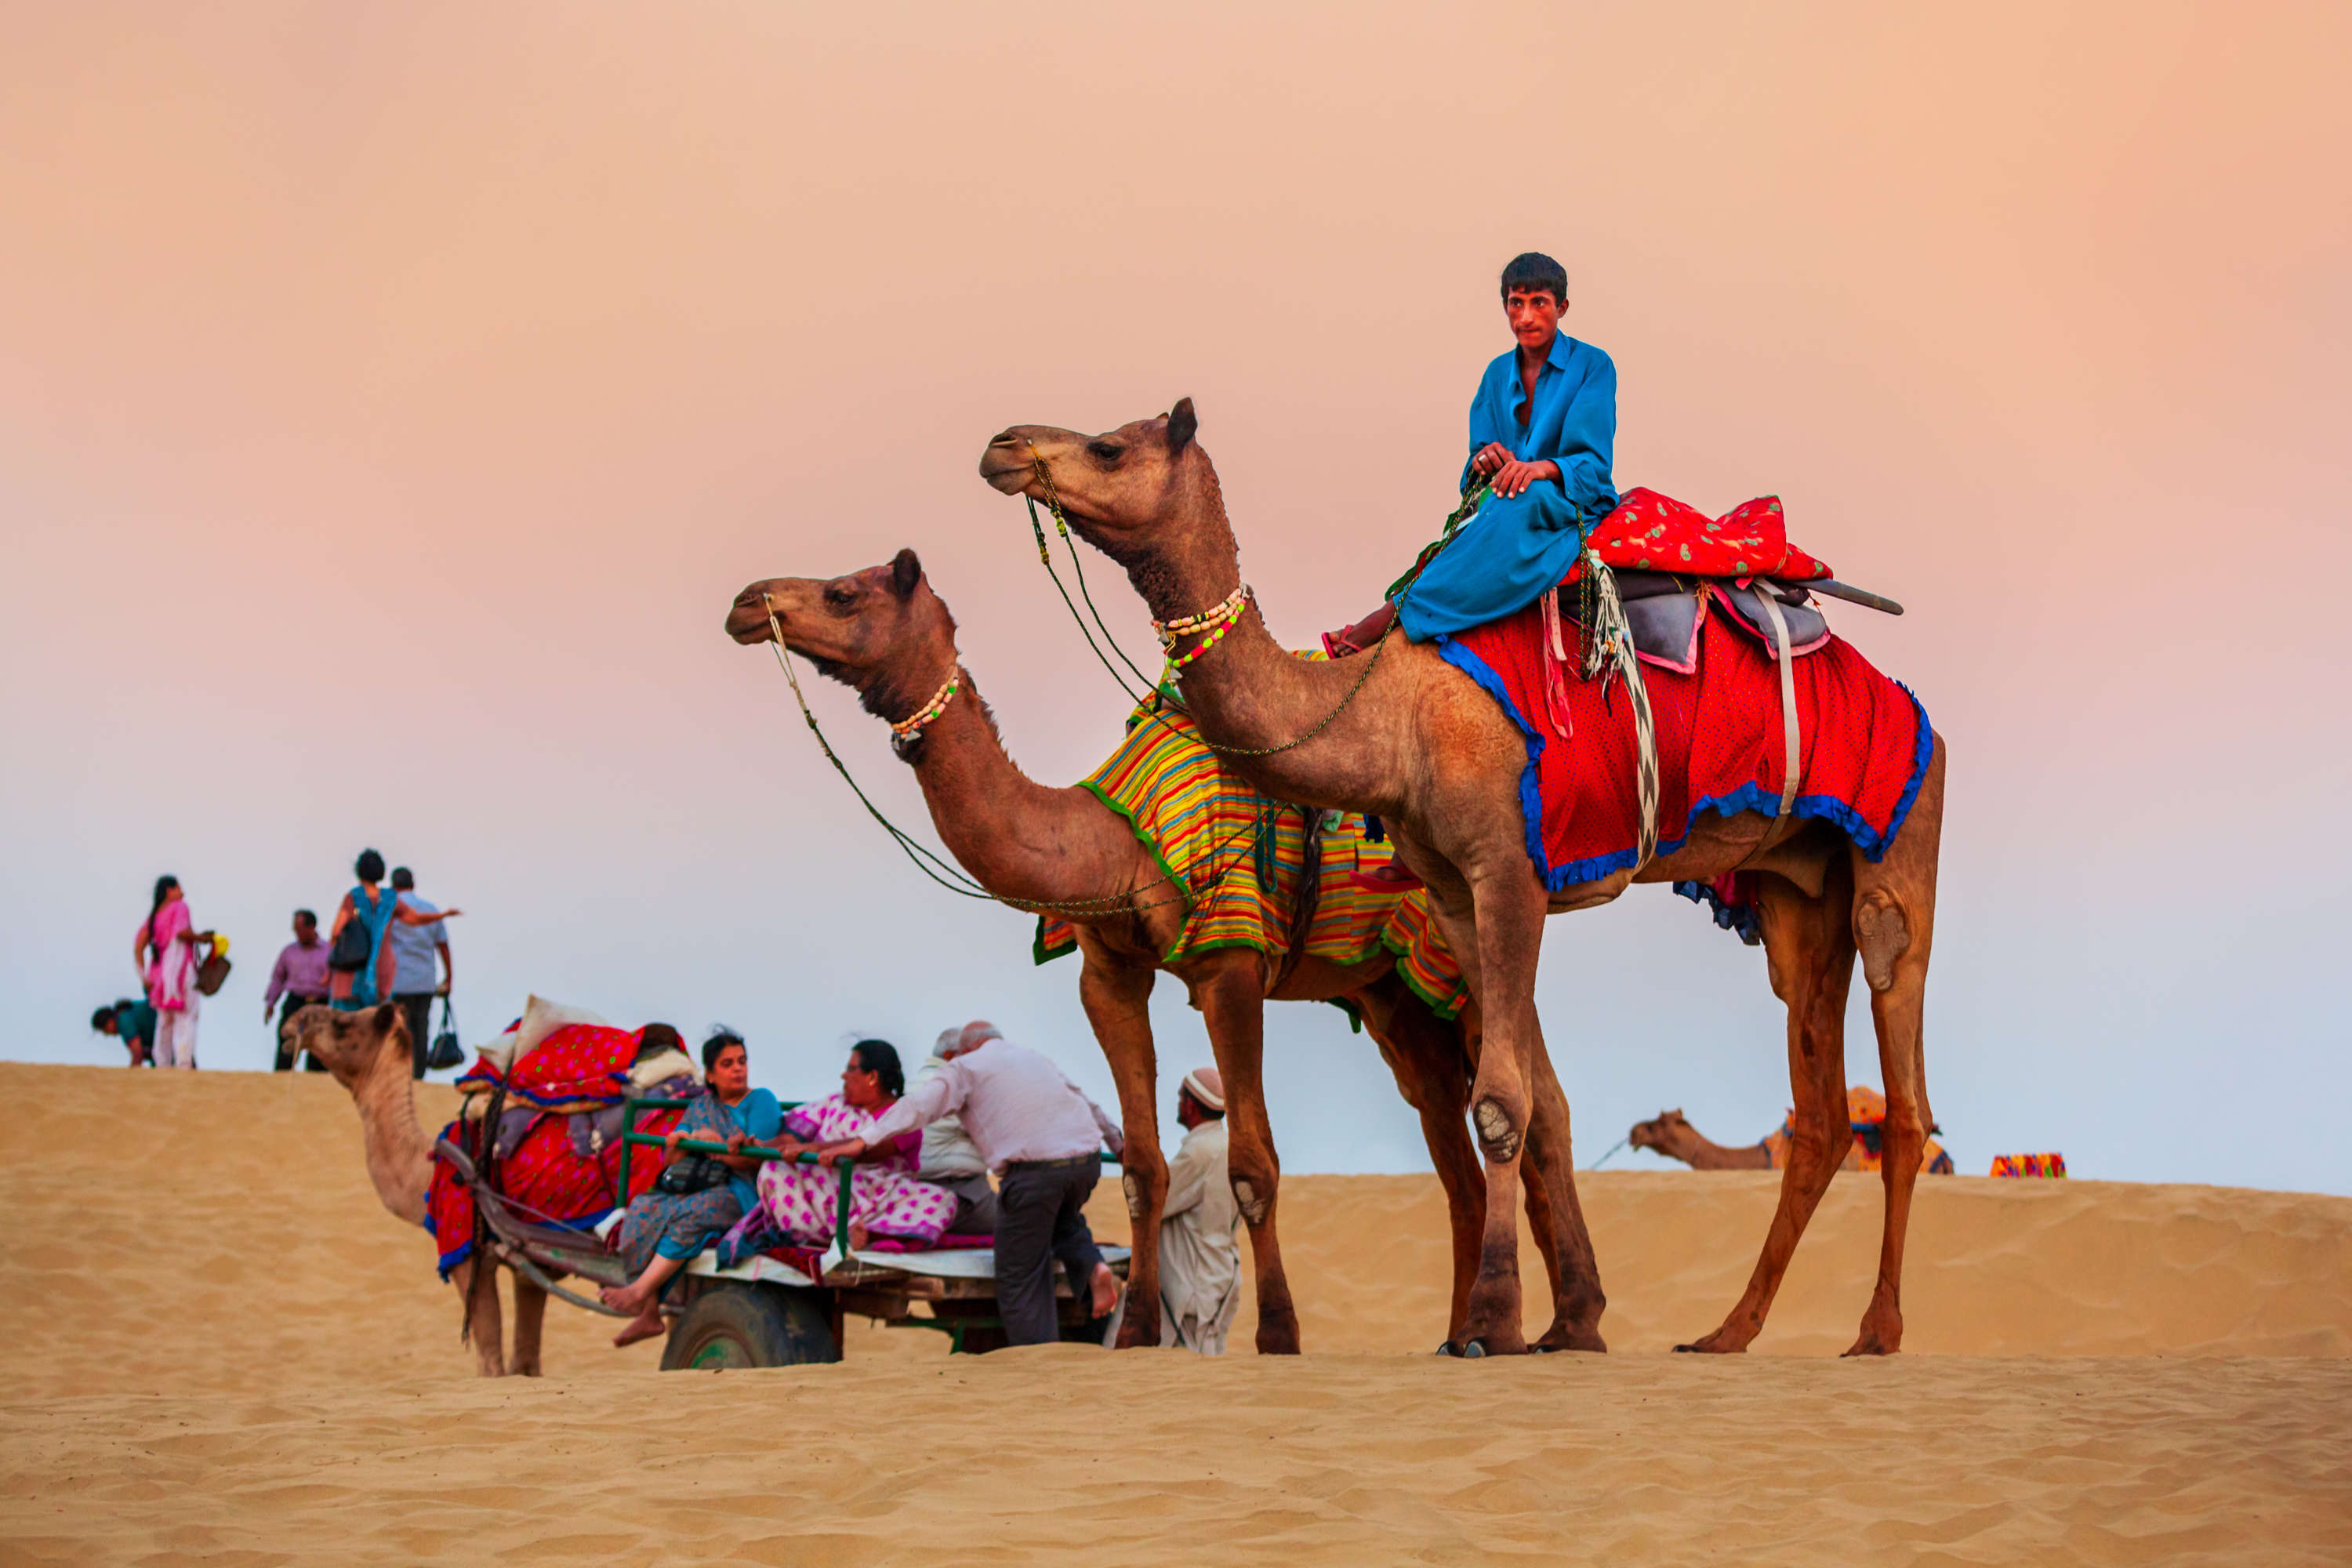 Planning a camel safari in the Thar Desert? Here’s what to know